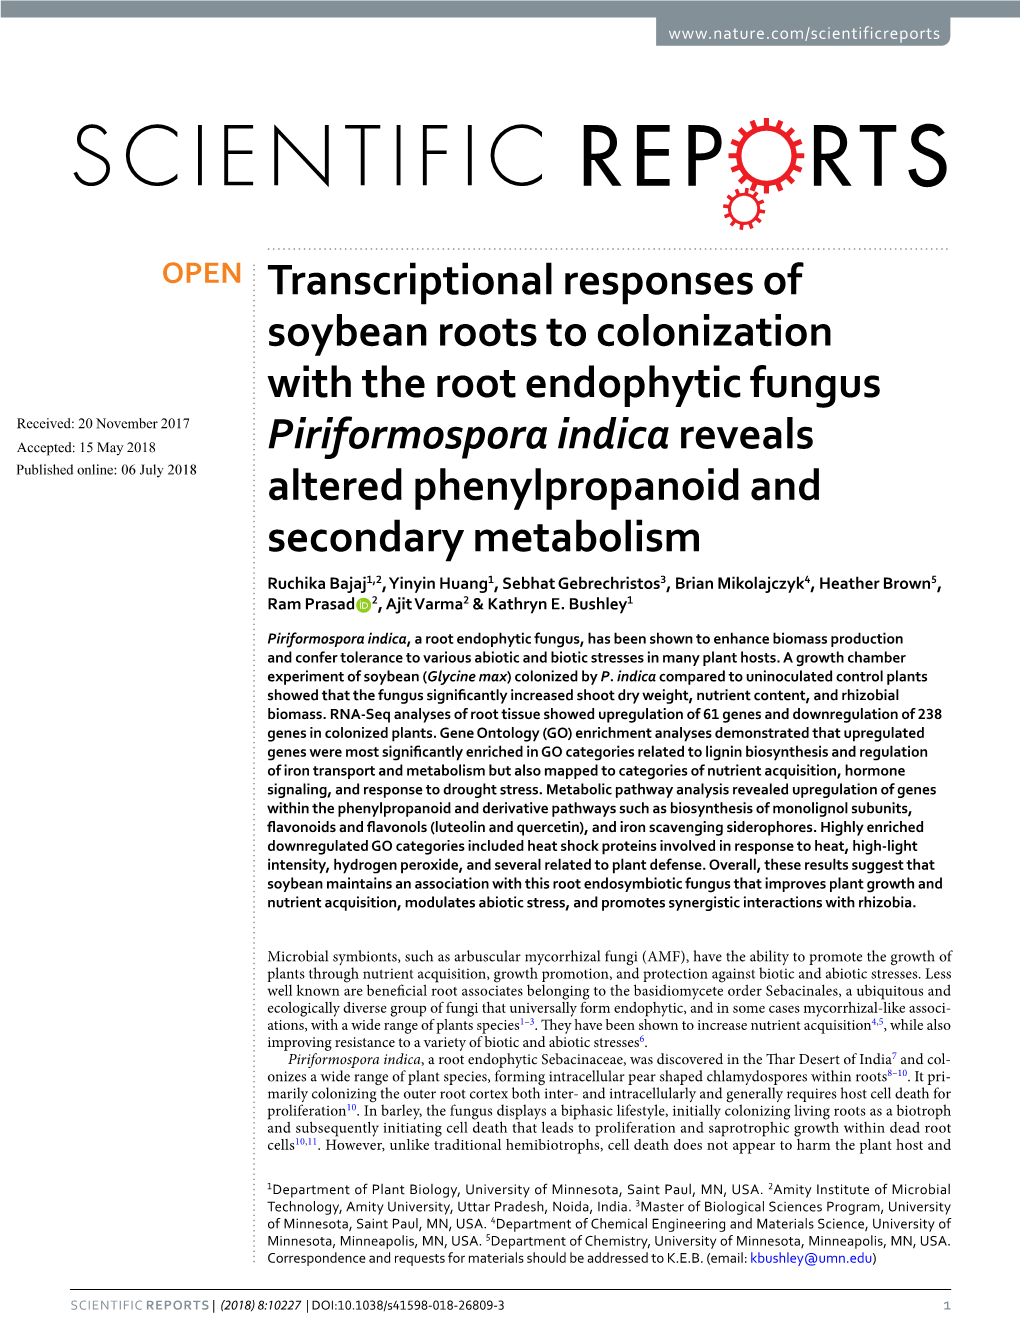 Transcriptional Responses of Soybean Roots to Colonization With